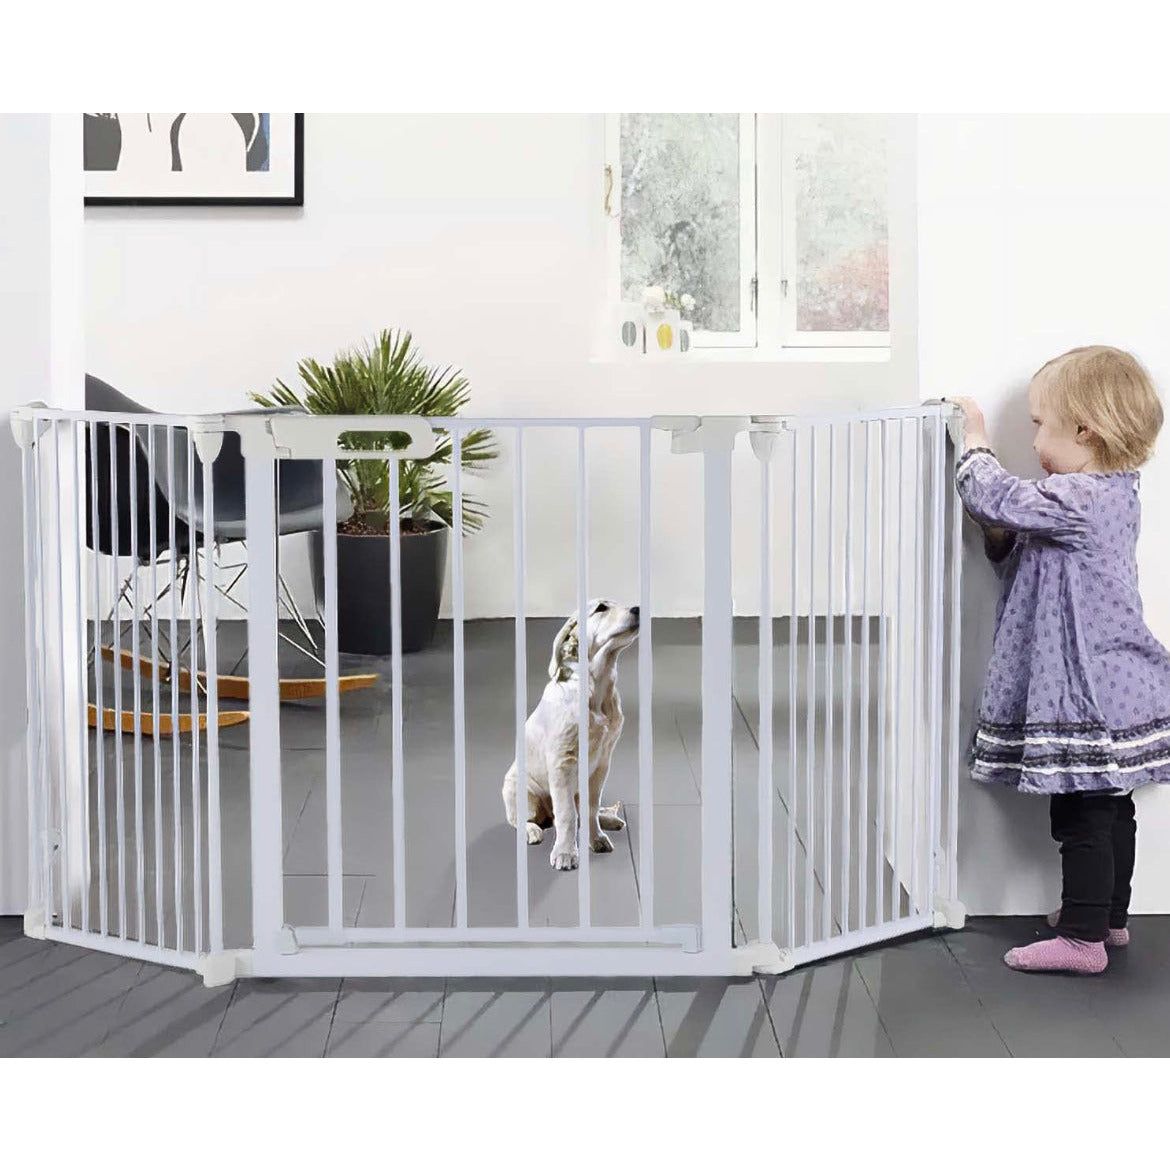 80” Metal Fireplace Fence Guard 3-Panel Baby Safety Gate, Auto Close Baby Fence, Foldable Safety Extra Wide Fence with One Hand Operation, Hardware Mount, Deluxe Walk Thru Pet Gate for Doorways - Selzalot